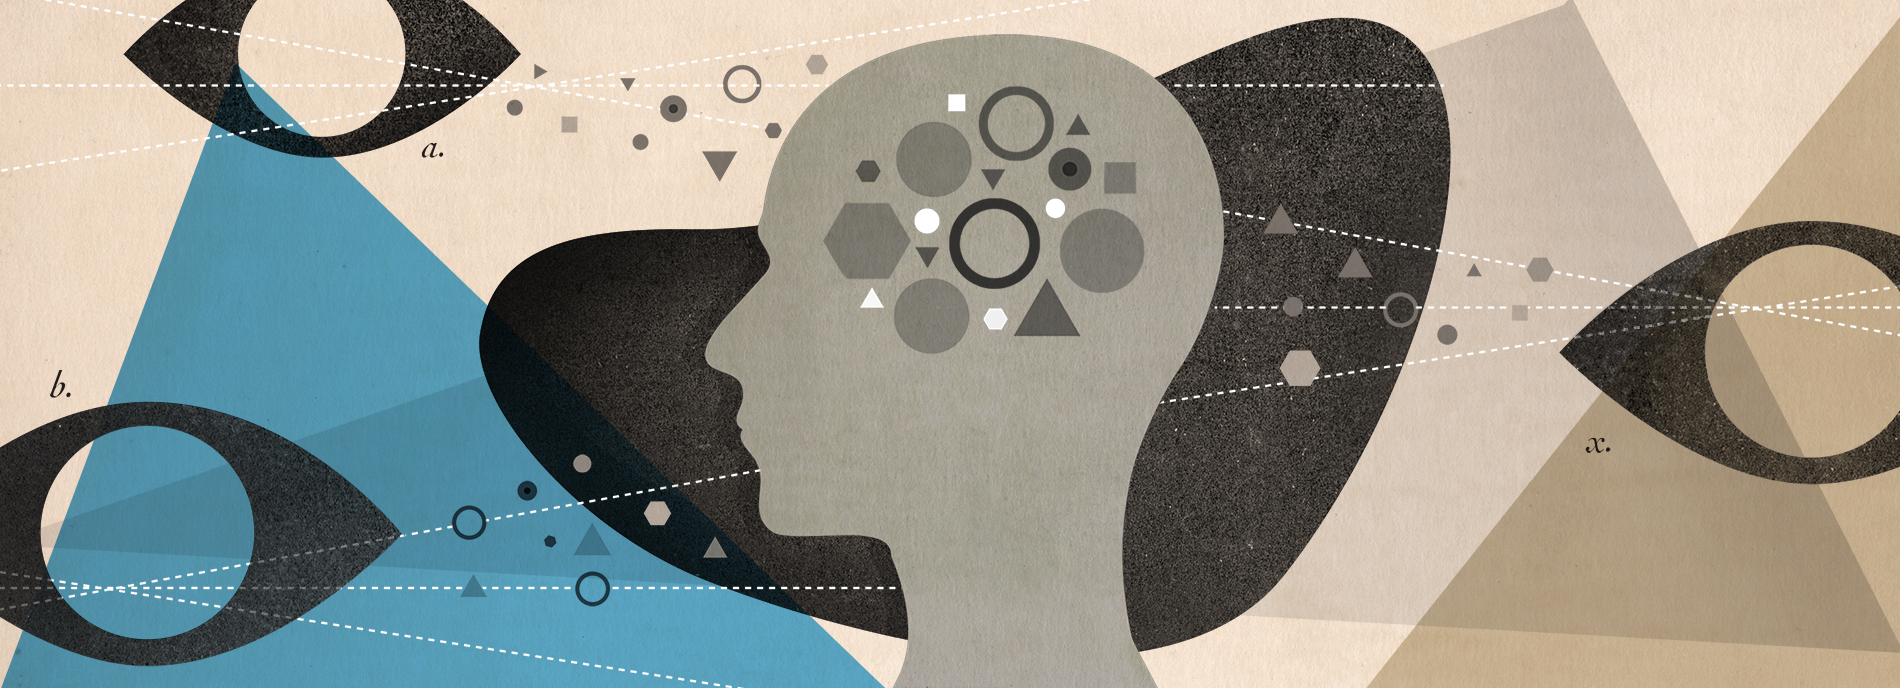 An illustration to accompany an article about With a growing acknowledgement of self-awareness in people with autism, self-report questionnaires are gaining popularity in research and clinical practice.